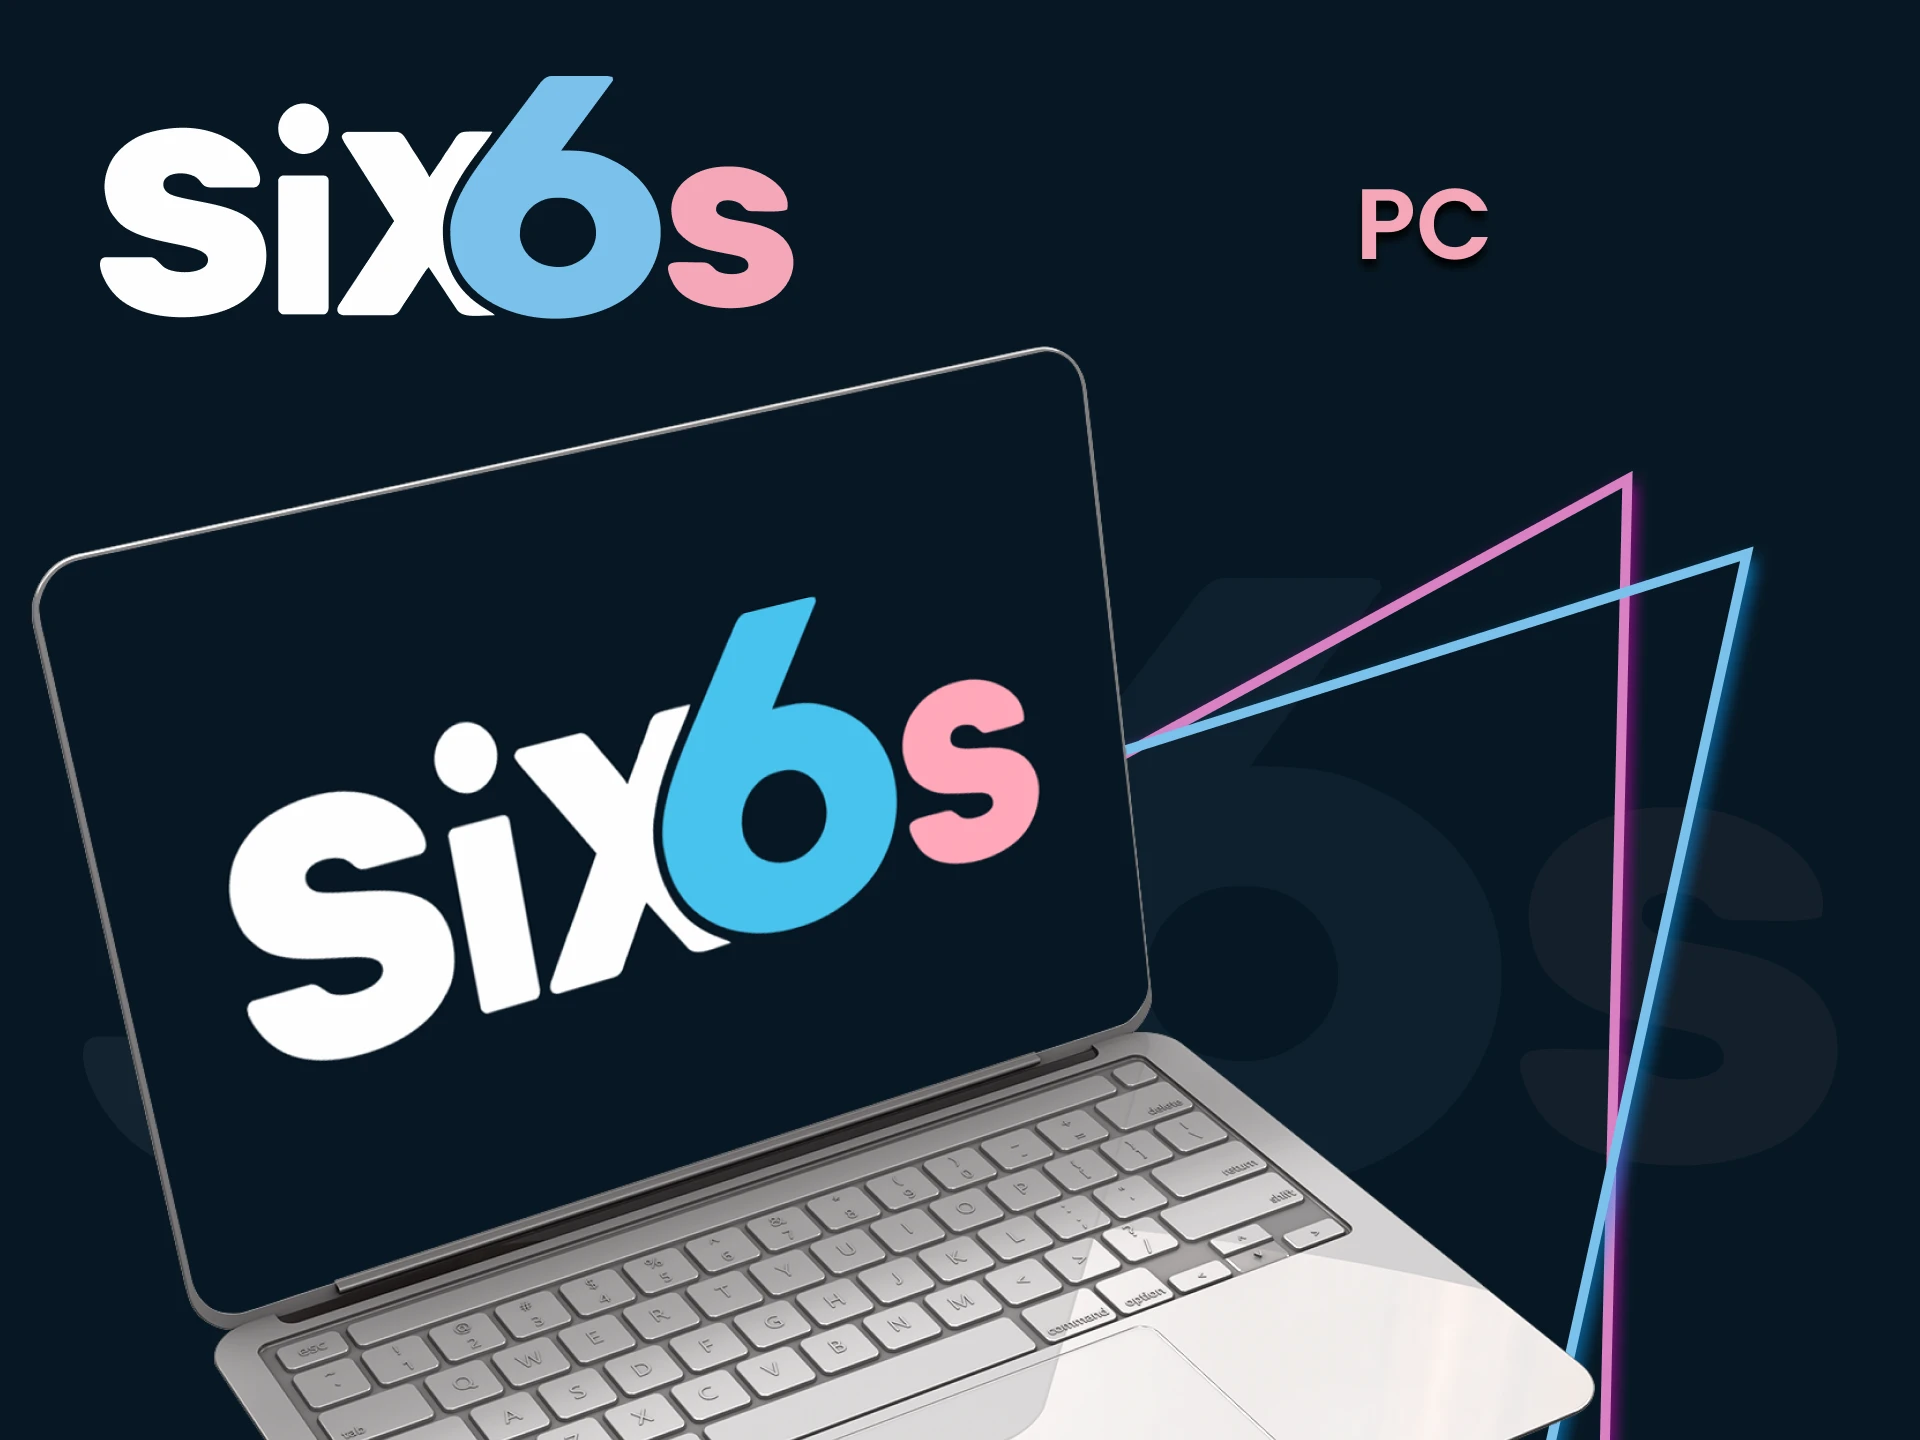 Learn about the Six6s PC app